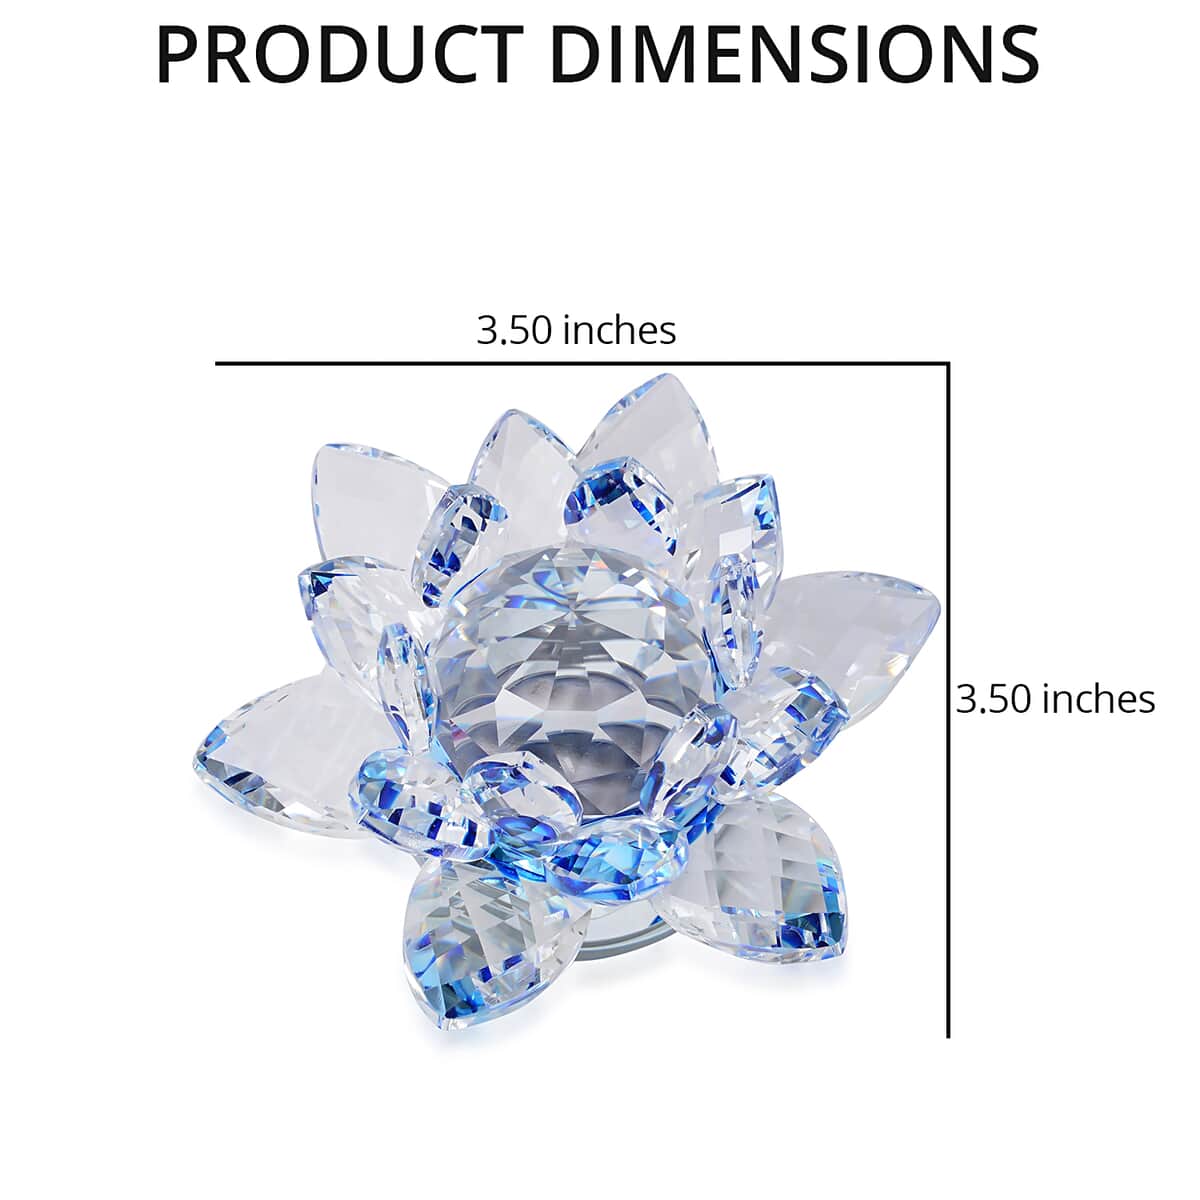 Set of 2 Blue Crystal Lotus Flower with Rotating Base Sculpted Decorations Gifts Box Case for Room Home Kitchen Table Decor, Home Decoration Items Gifts Decorative Showpiece image number 3